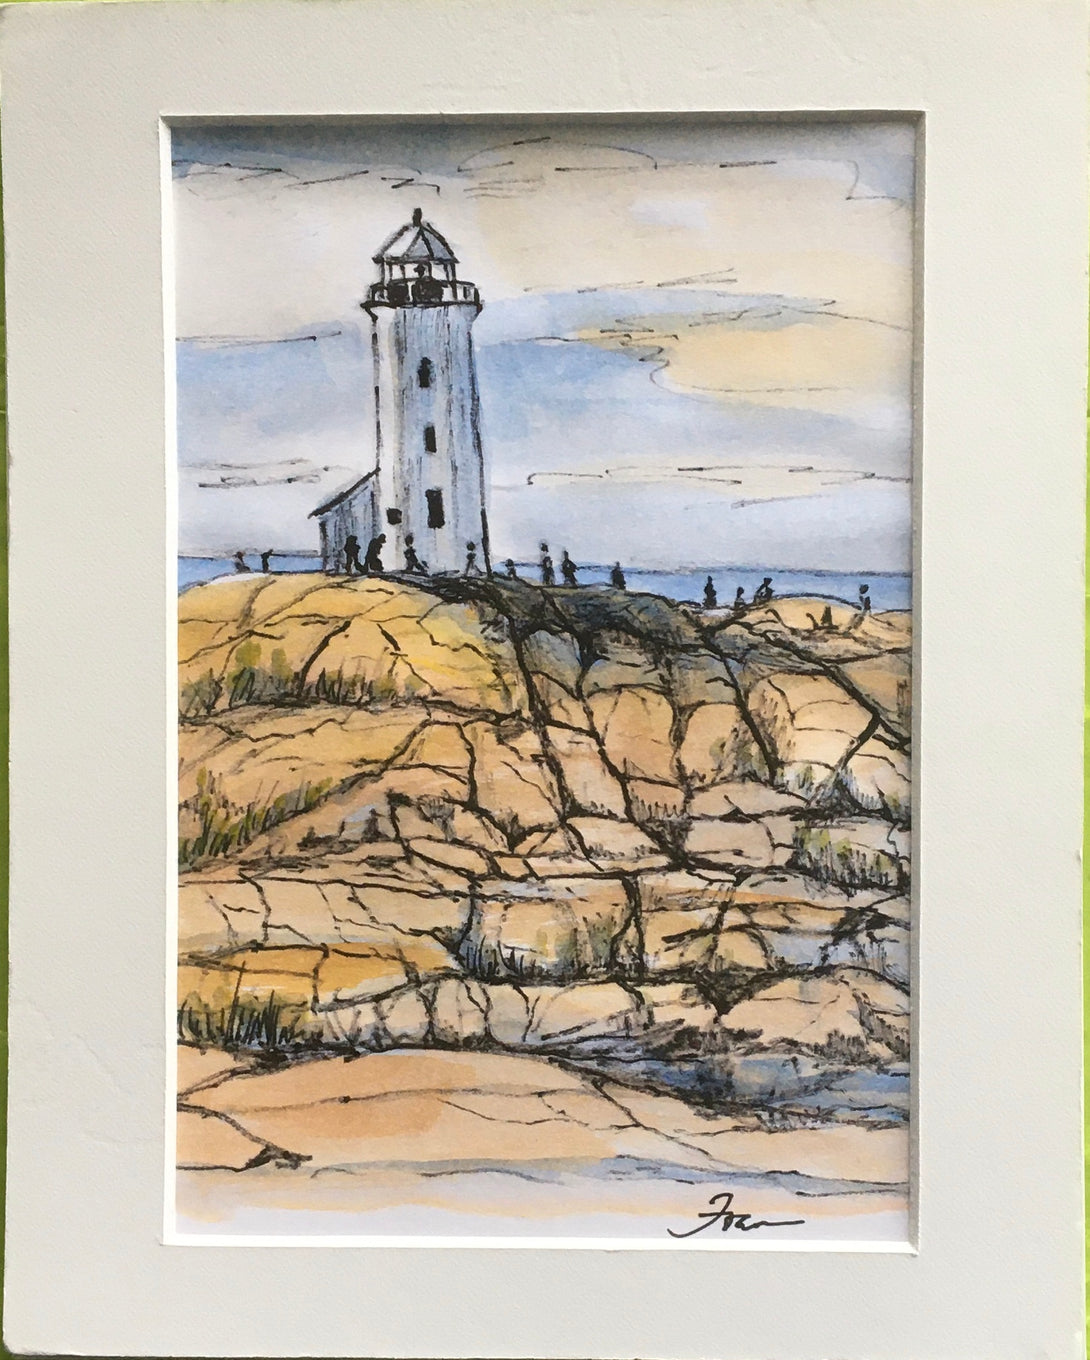 Fran Renwick -Watercolour Painting - Lighthouse, matted, unframed by Fran Renwick - McMillan Arts Centre - Vancouver Island Art Gallery